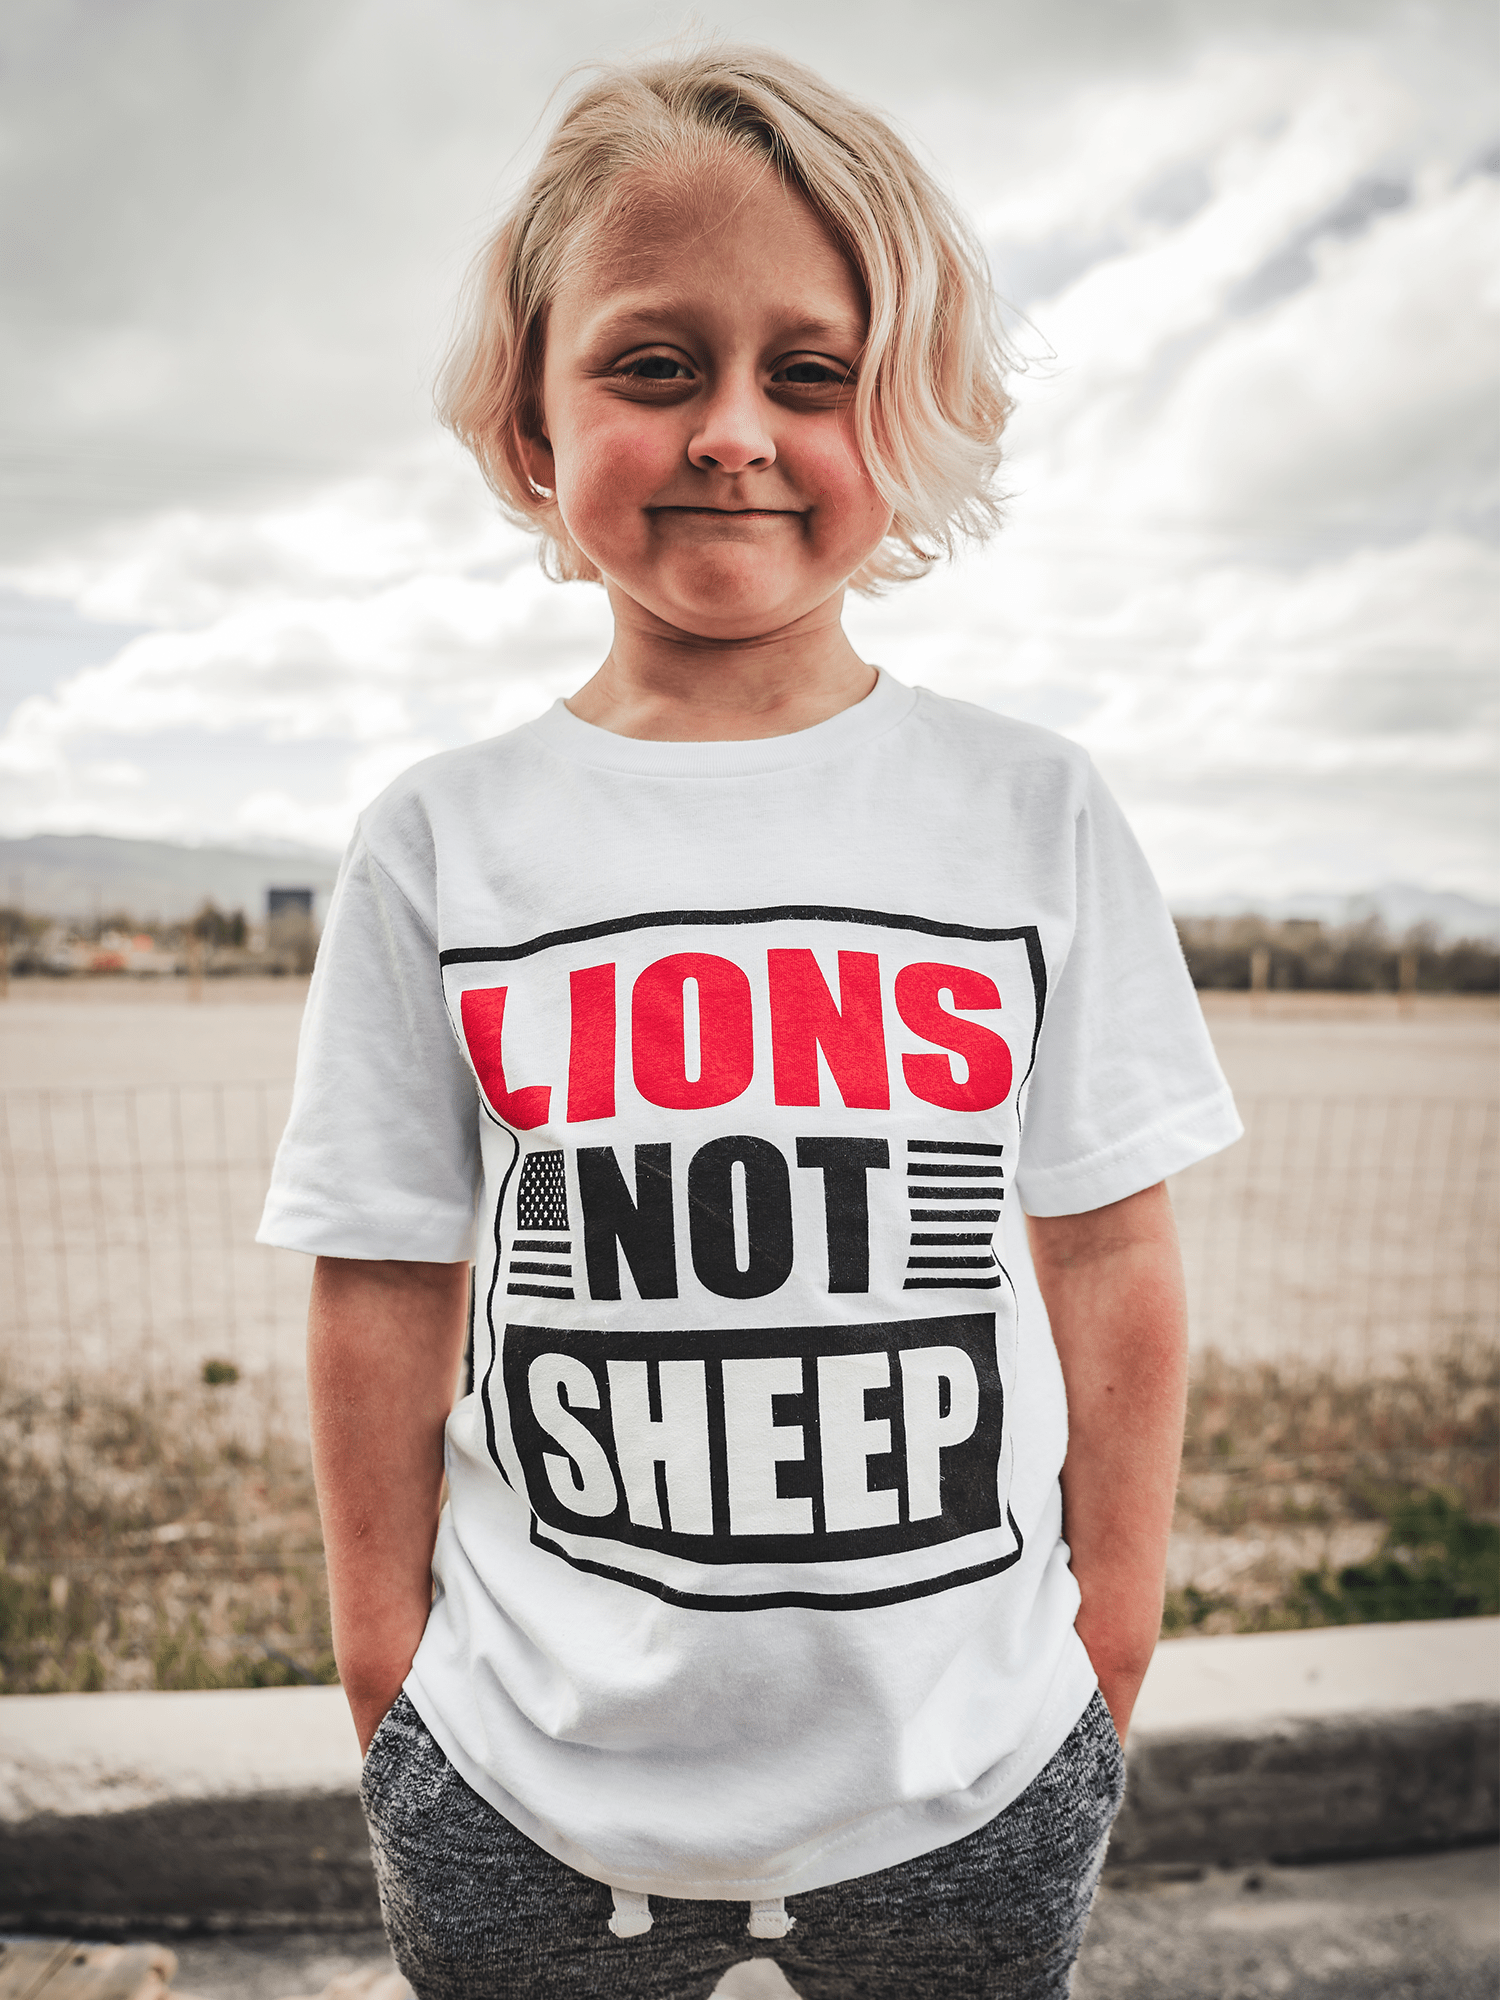 STREET Youth Tee - Lions Not Sheep ®